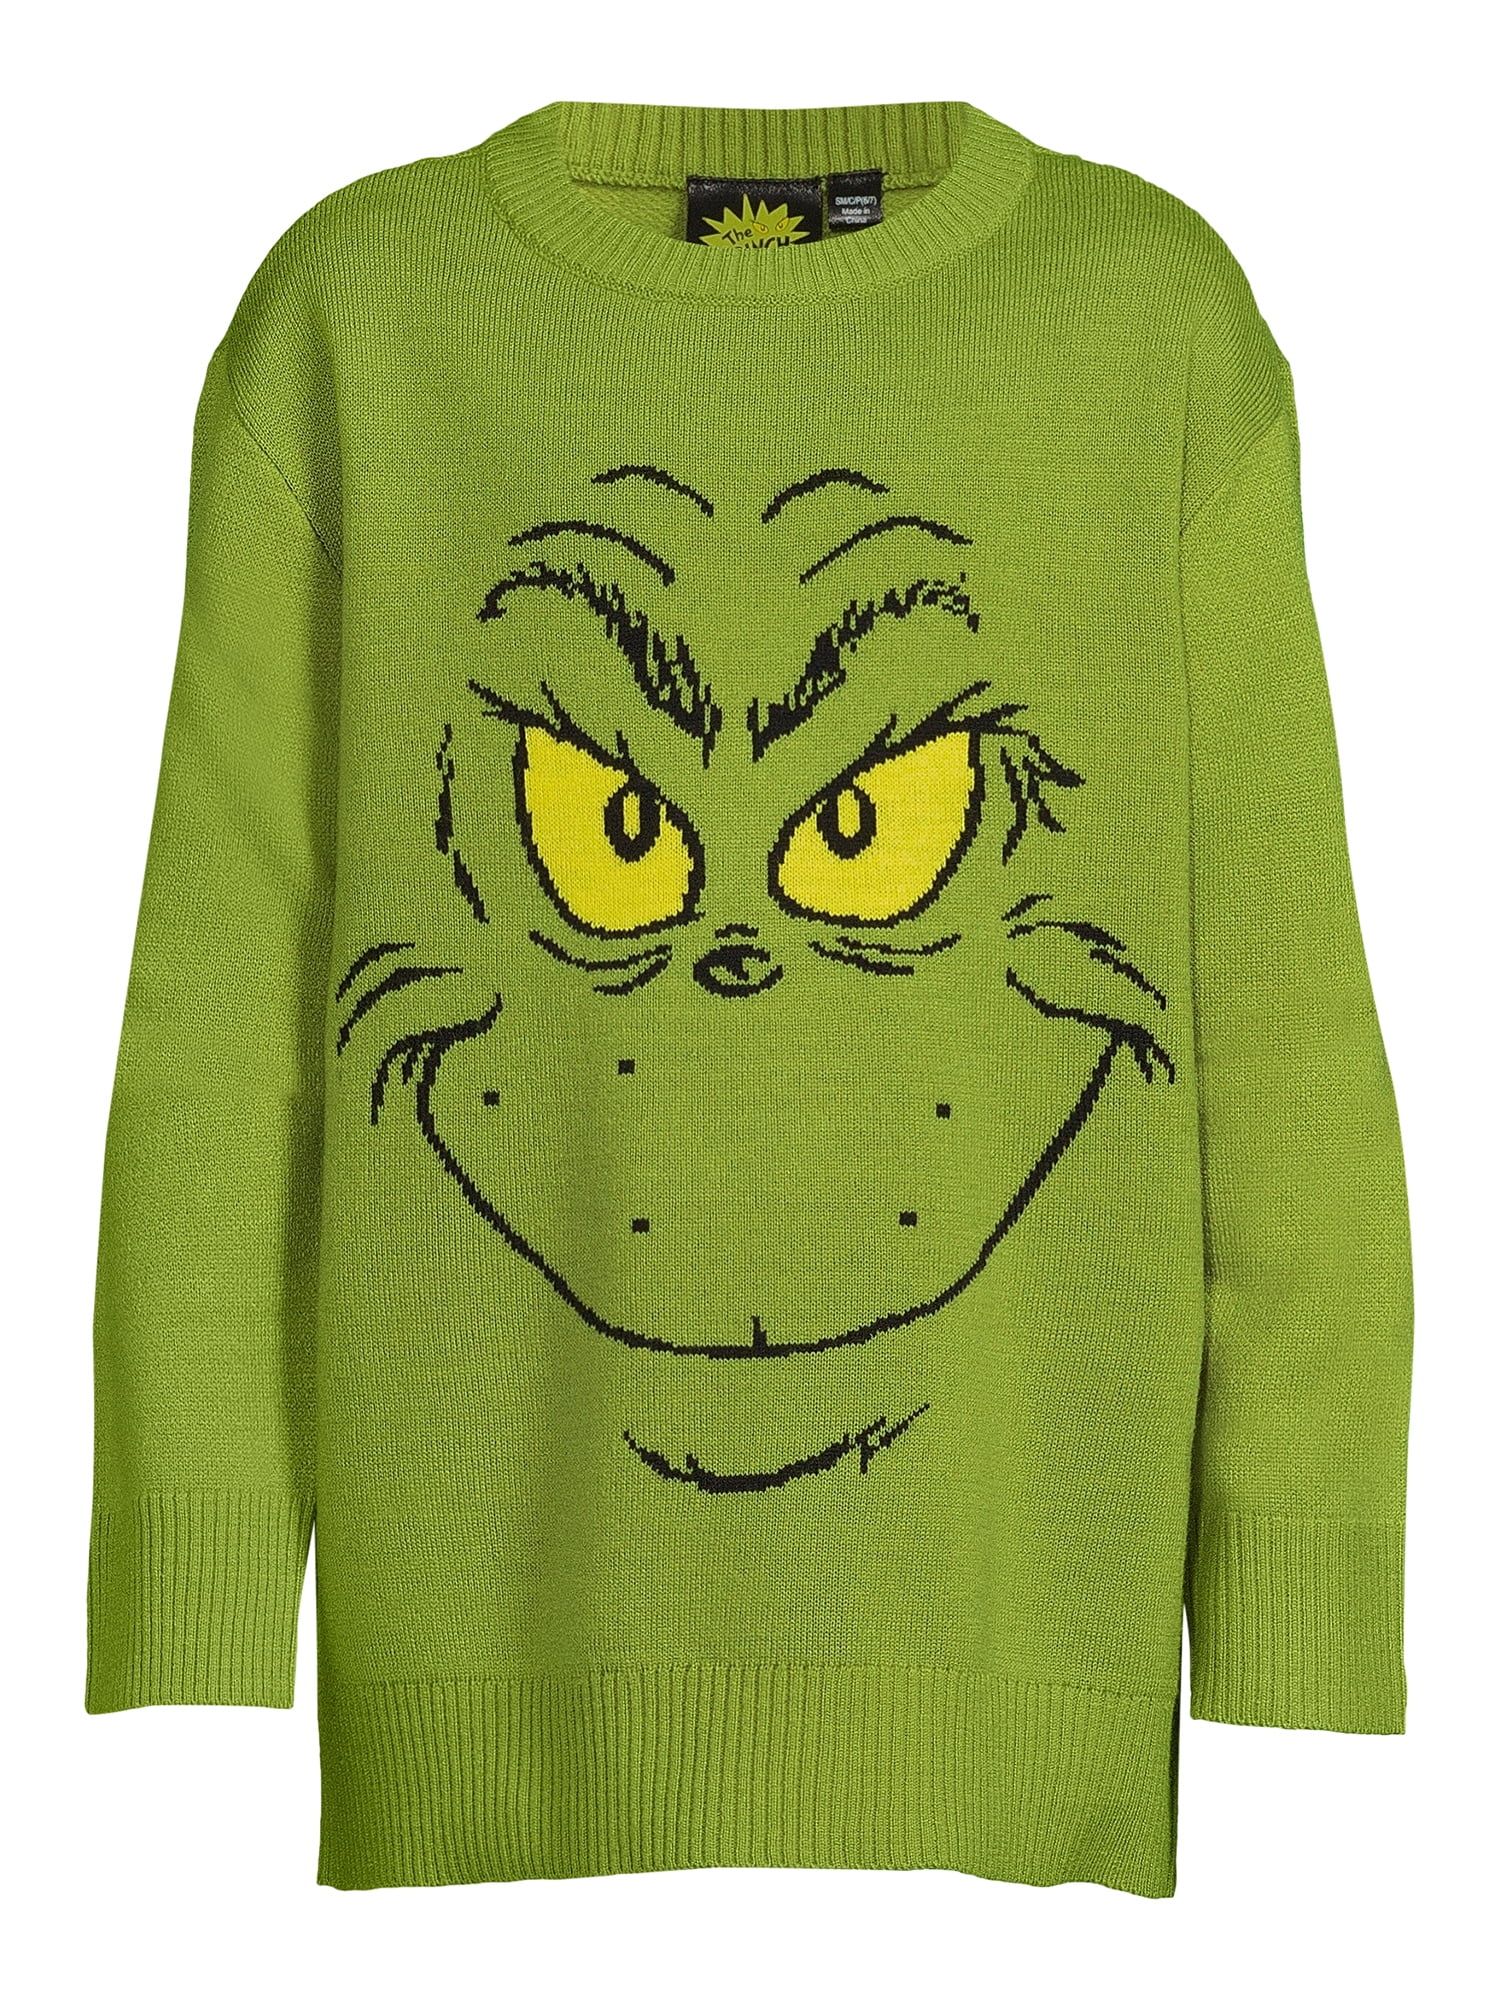 The Grinch Boys Graphic Holiday Crew Neck Sweater, Size XS-2XL | Walmart (US)